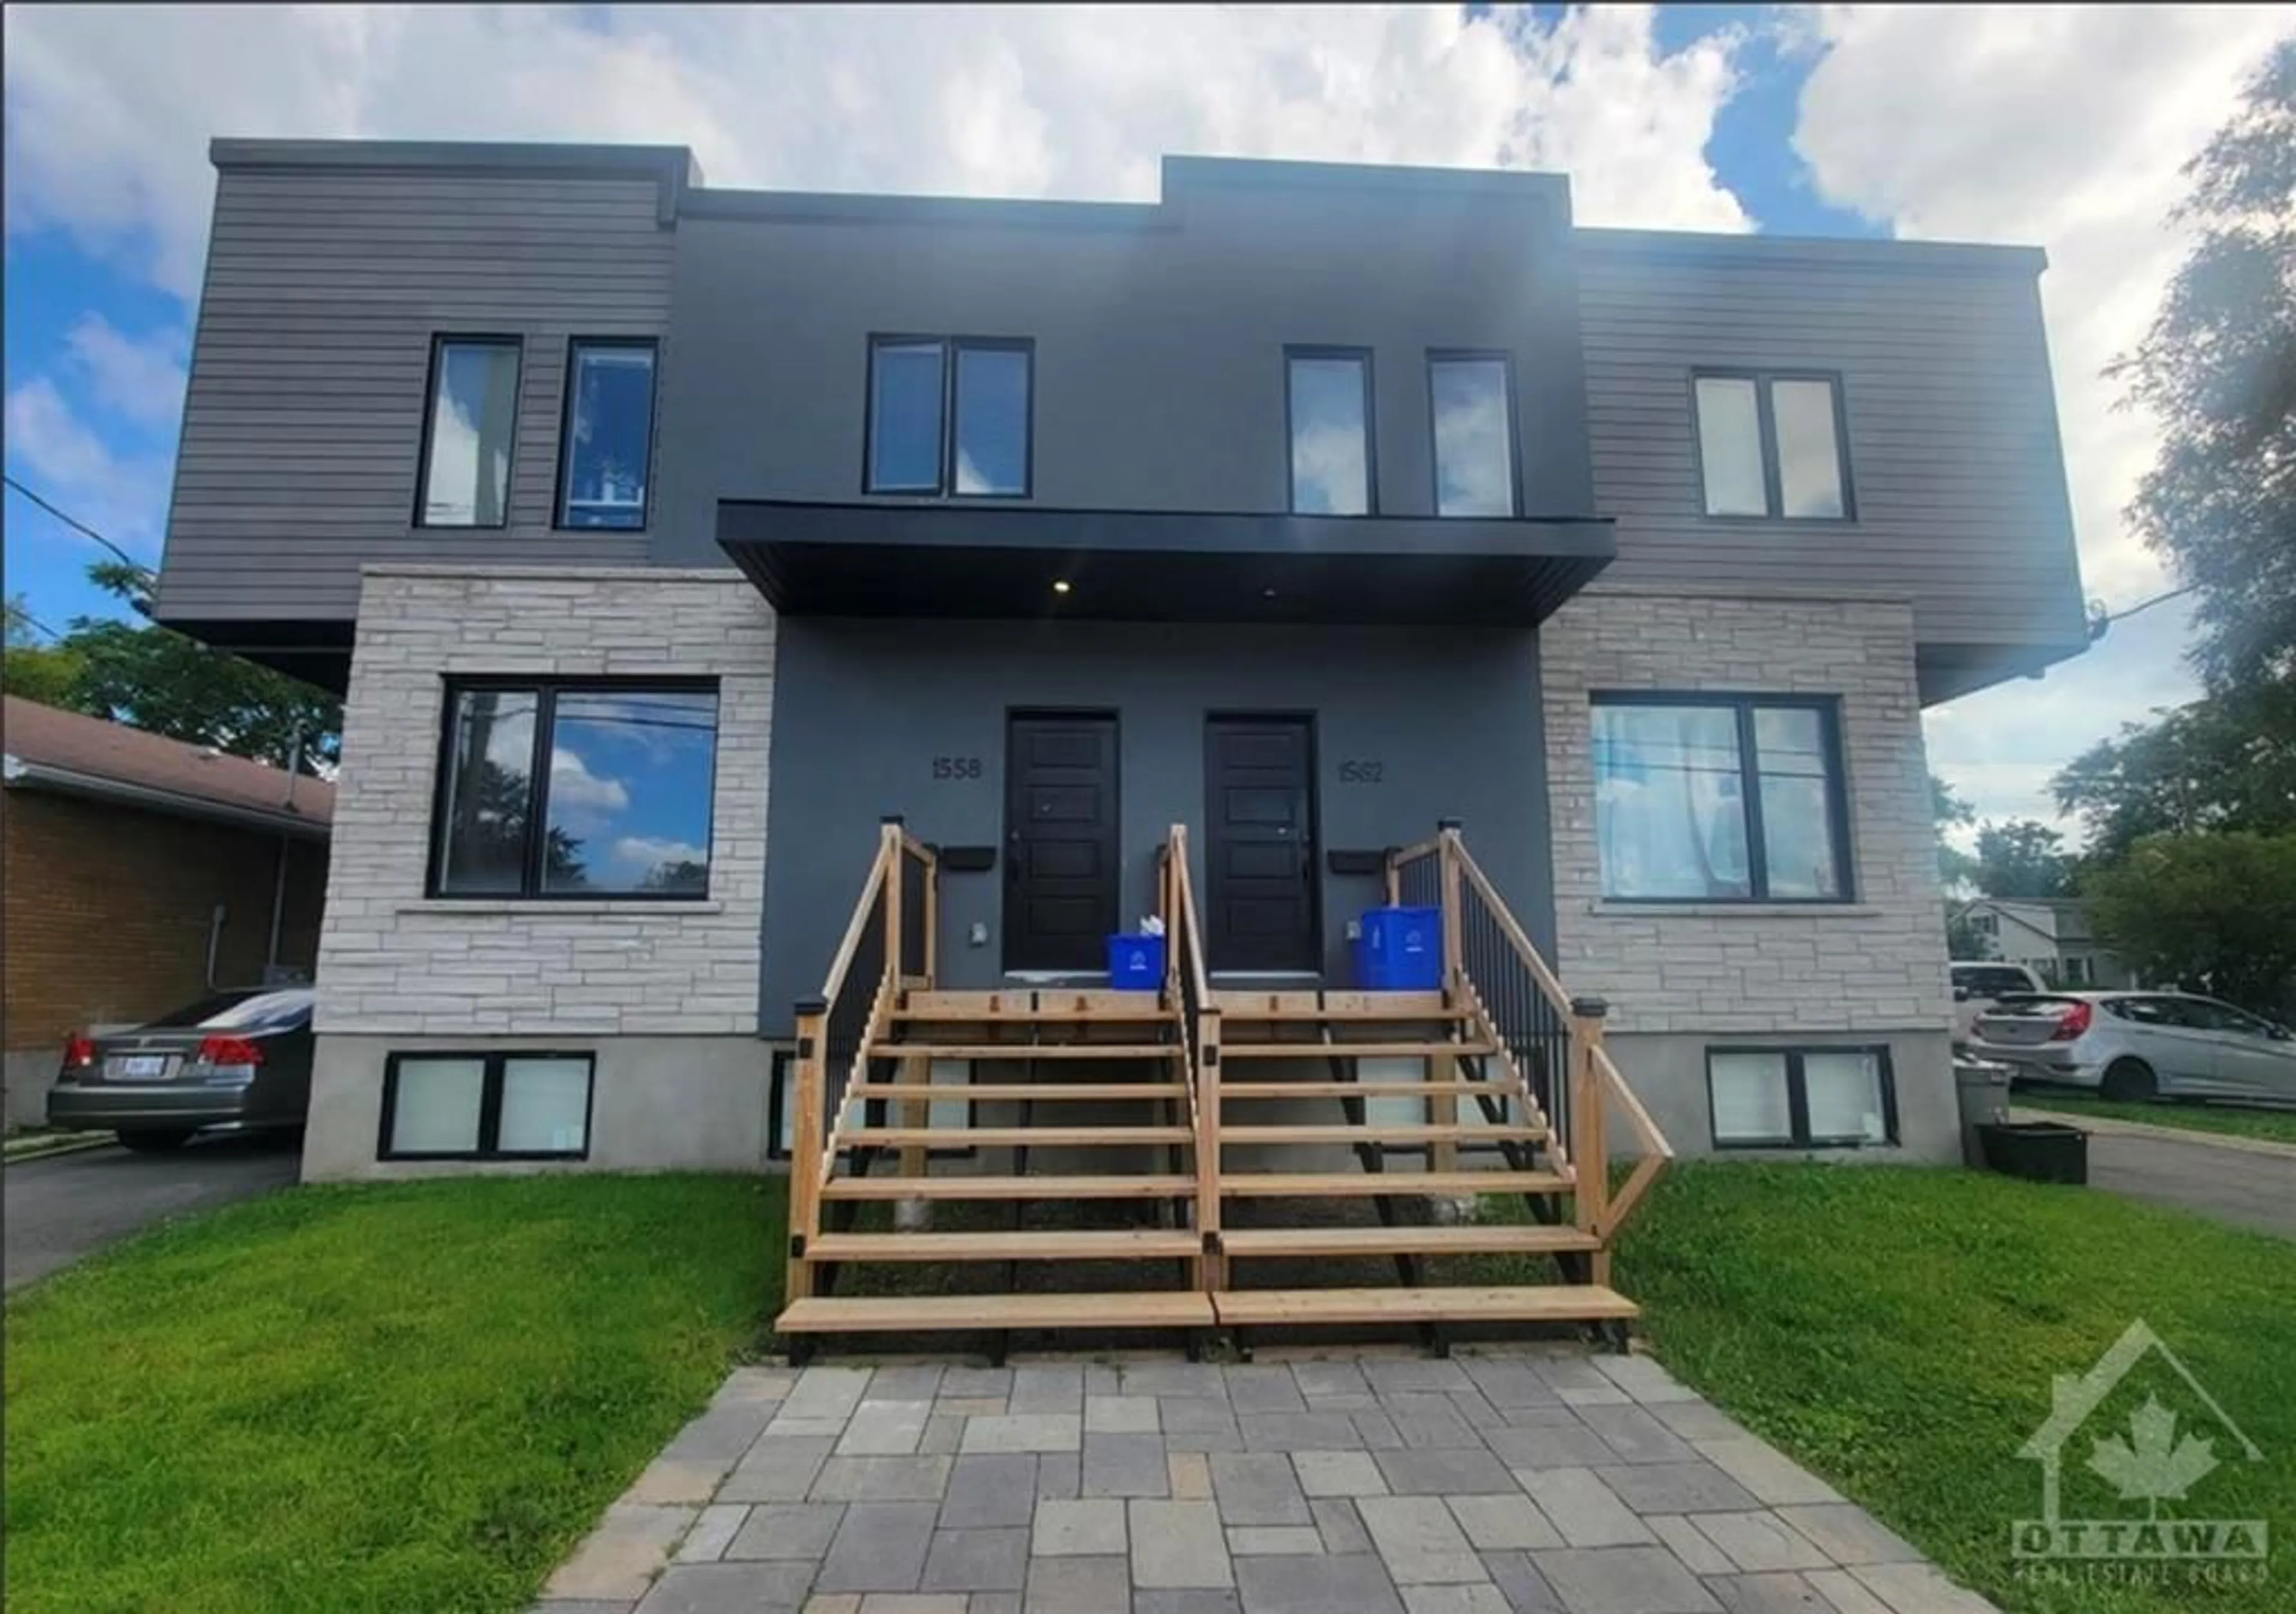 A pic from exterior of the house or condo for 1558-1562 BASELINE Rd, Ottawa Ontario K2C 0B3